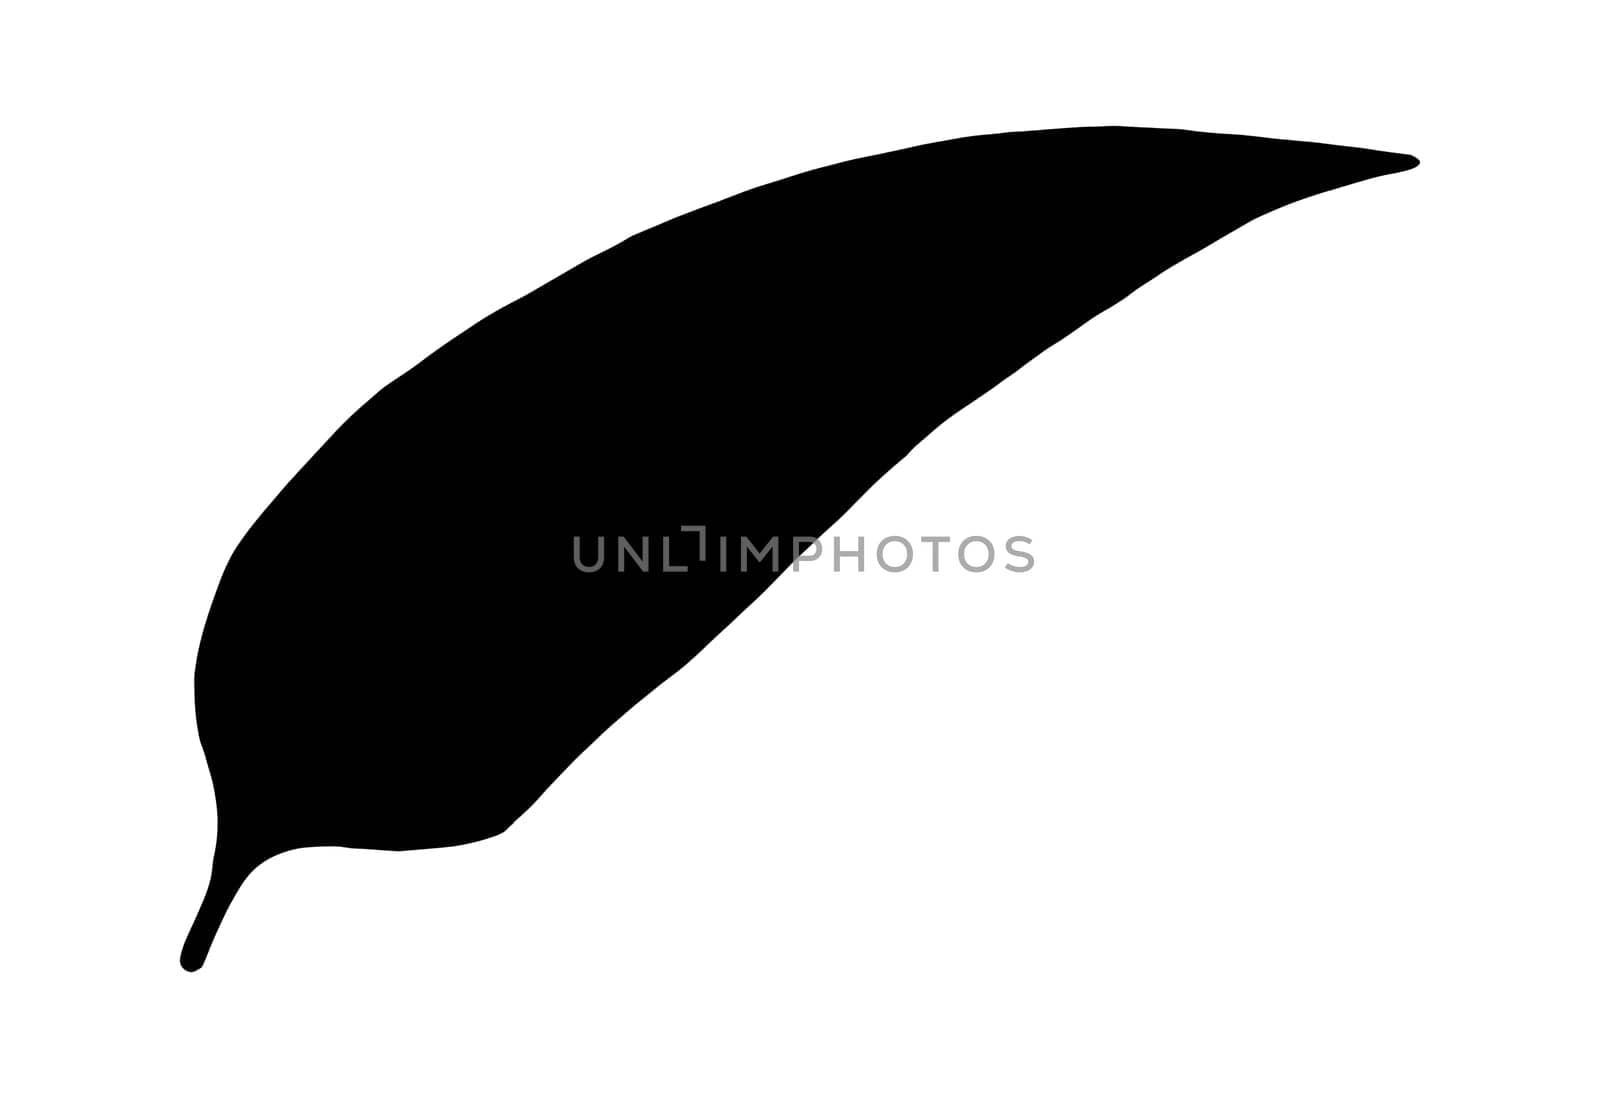 Hand Drawn Flower Leaf Silhouette. Black Floral Leaf Illustration. Plant Silhouette Isolated on White Background.